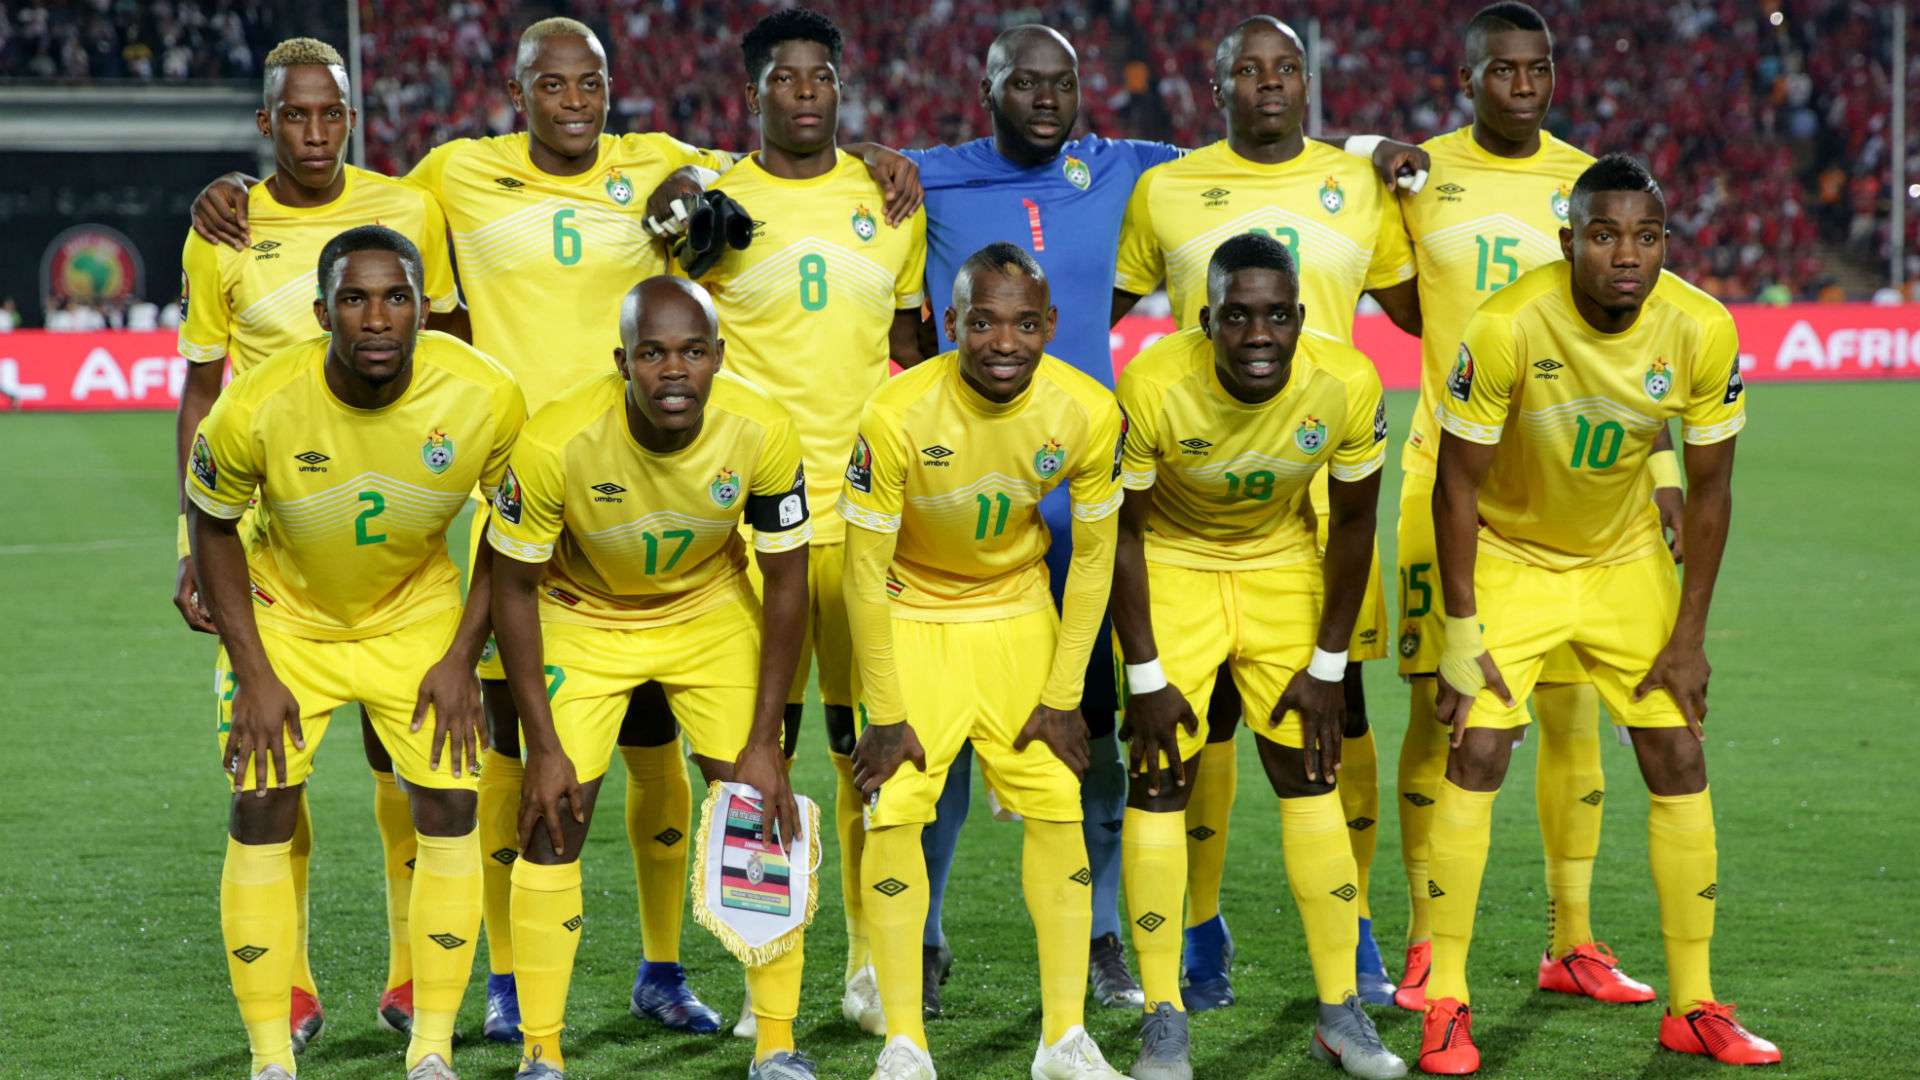 Zimbabwe team during the 2019 Africa Cup of Nations Finals match between Egypt .